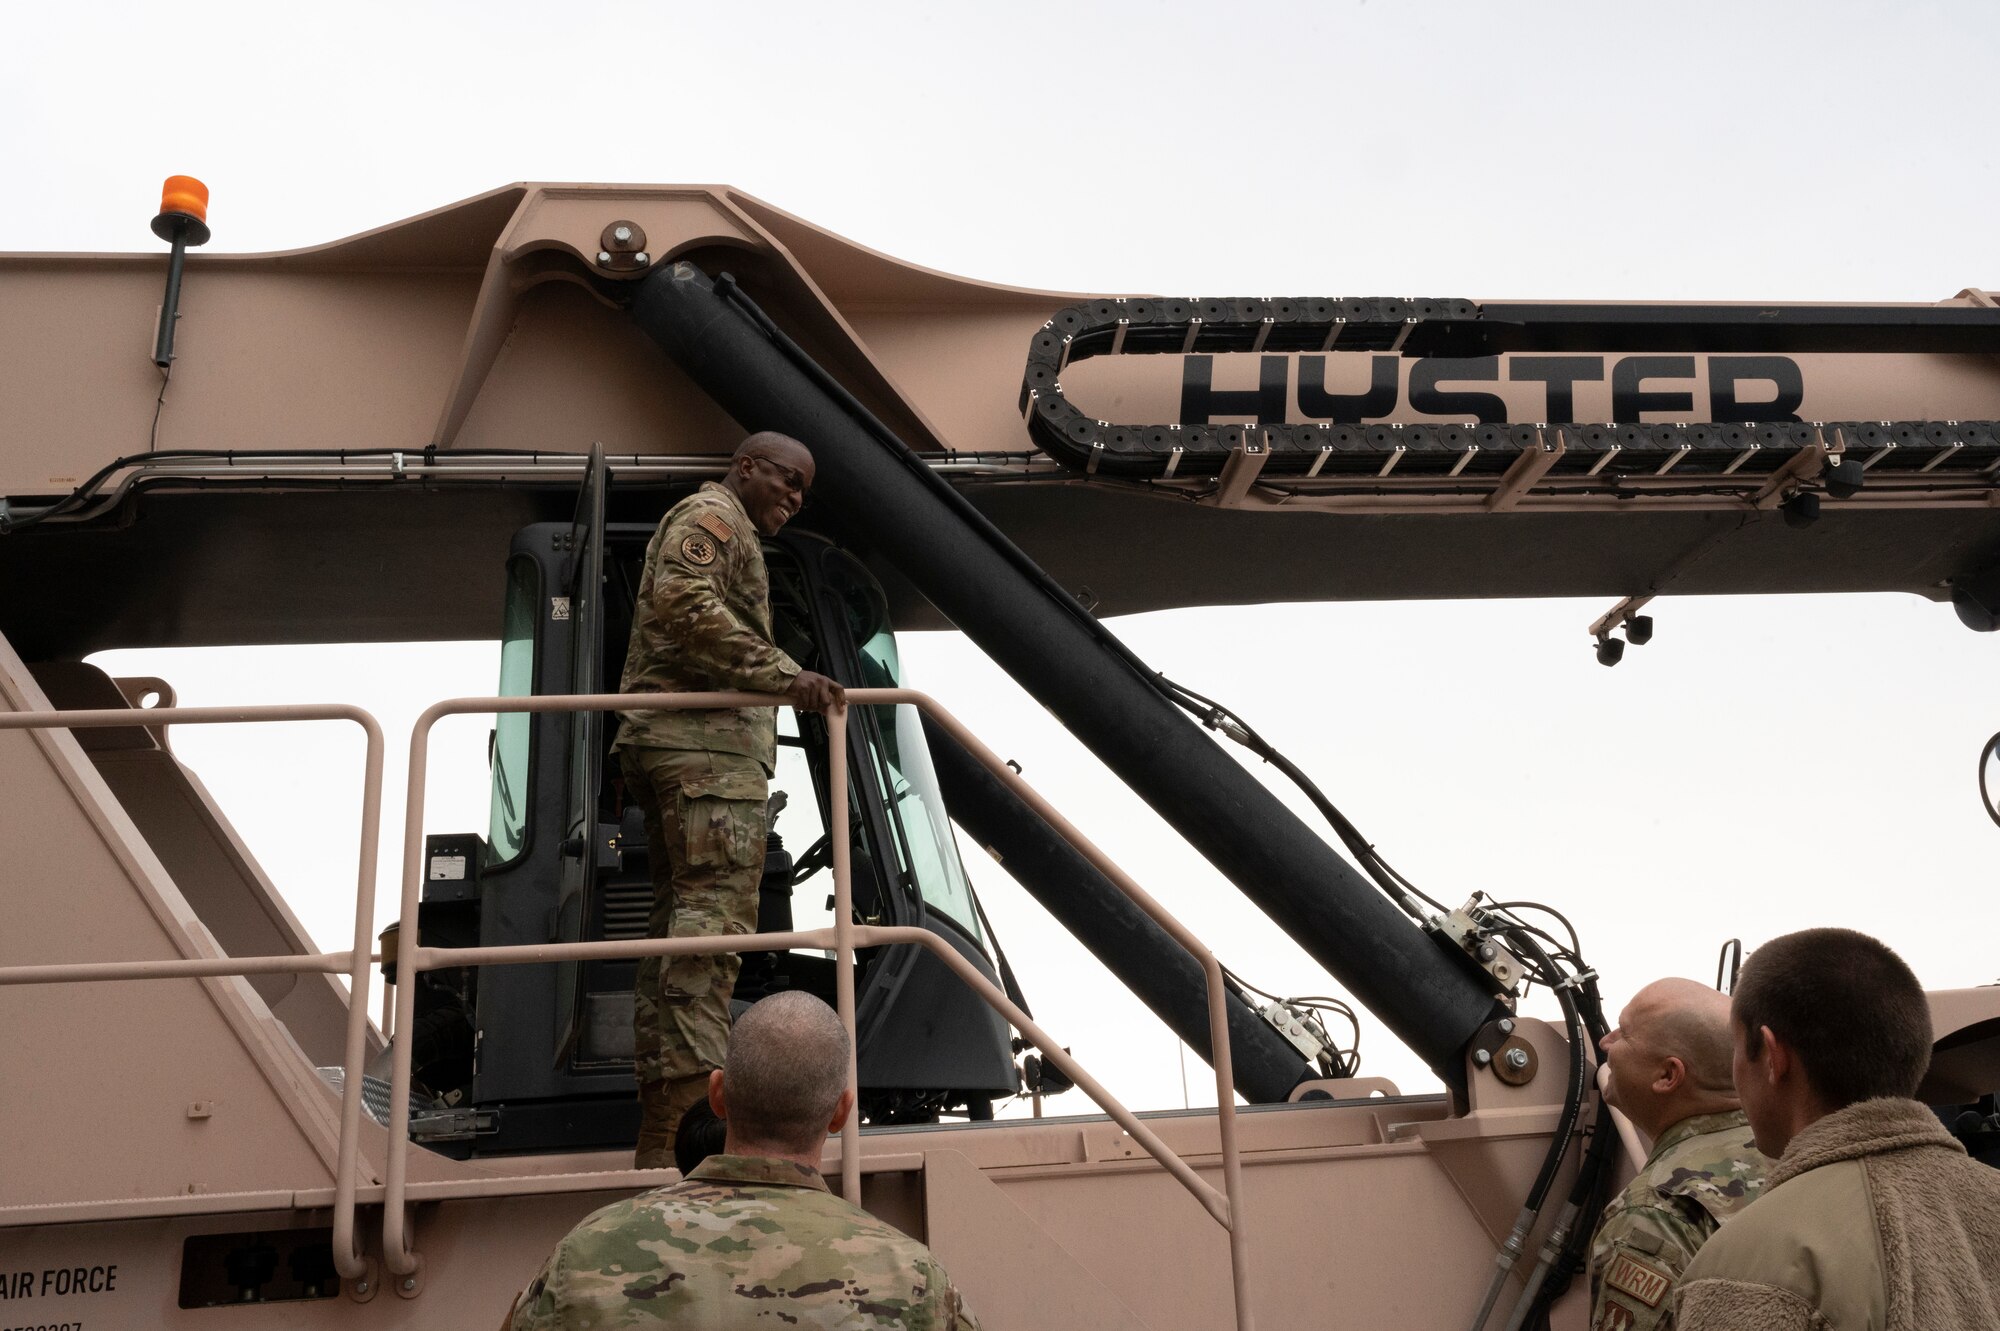 U.S. Air Force Lt. Gen. Stacey Hawkins, Air Force Sustainment Center commander, prepares to drive a Hyster Yardmaster II Reach Stacker during an immersion tour with the 635th Materiel Maintenance Group at Holloman Air Force Base, New Mexico, Dec. 7, 2022. The 635th MMG provides humanitarian support, natural disasters responses and the reconstitution of equipment on a global scale. (U.S. Air Force photo by Airman 1st Class Isaiah Pedrazzini)